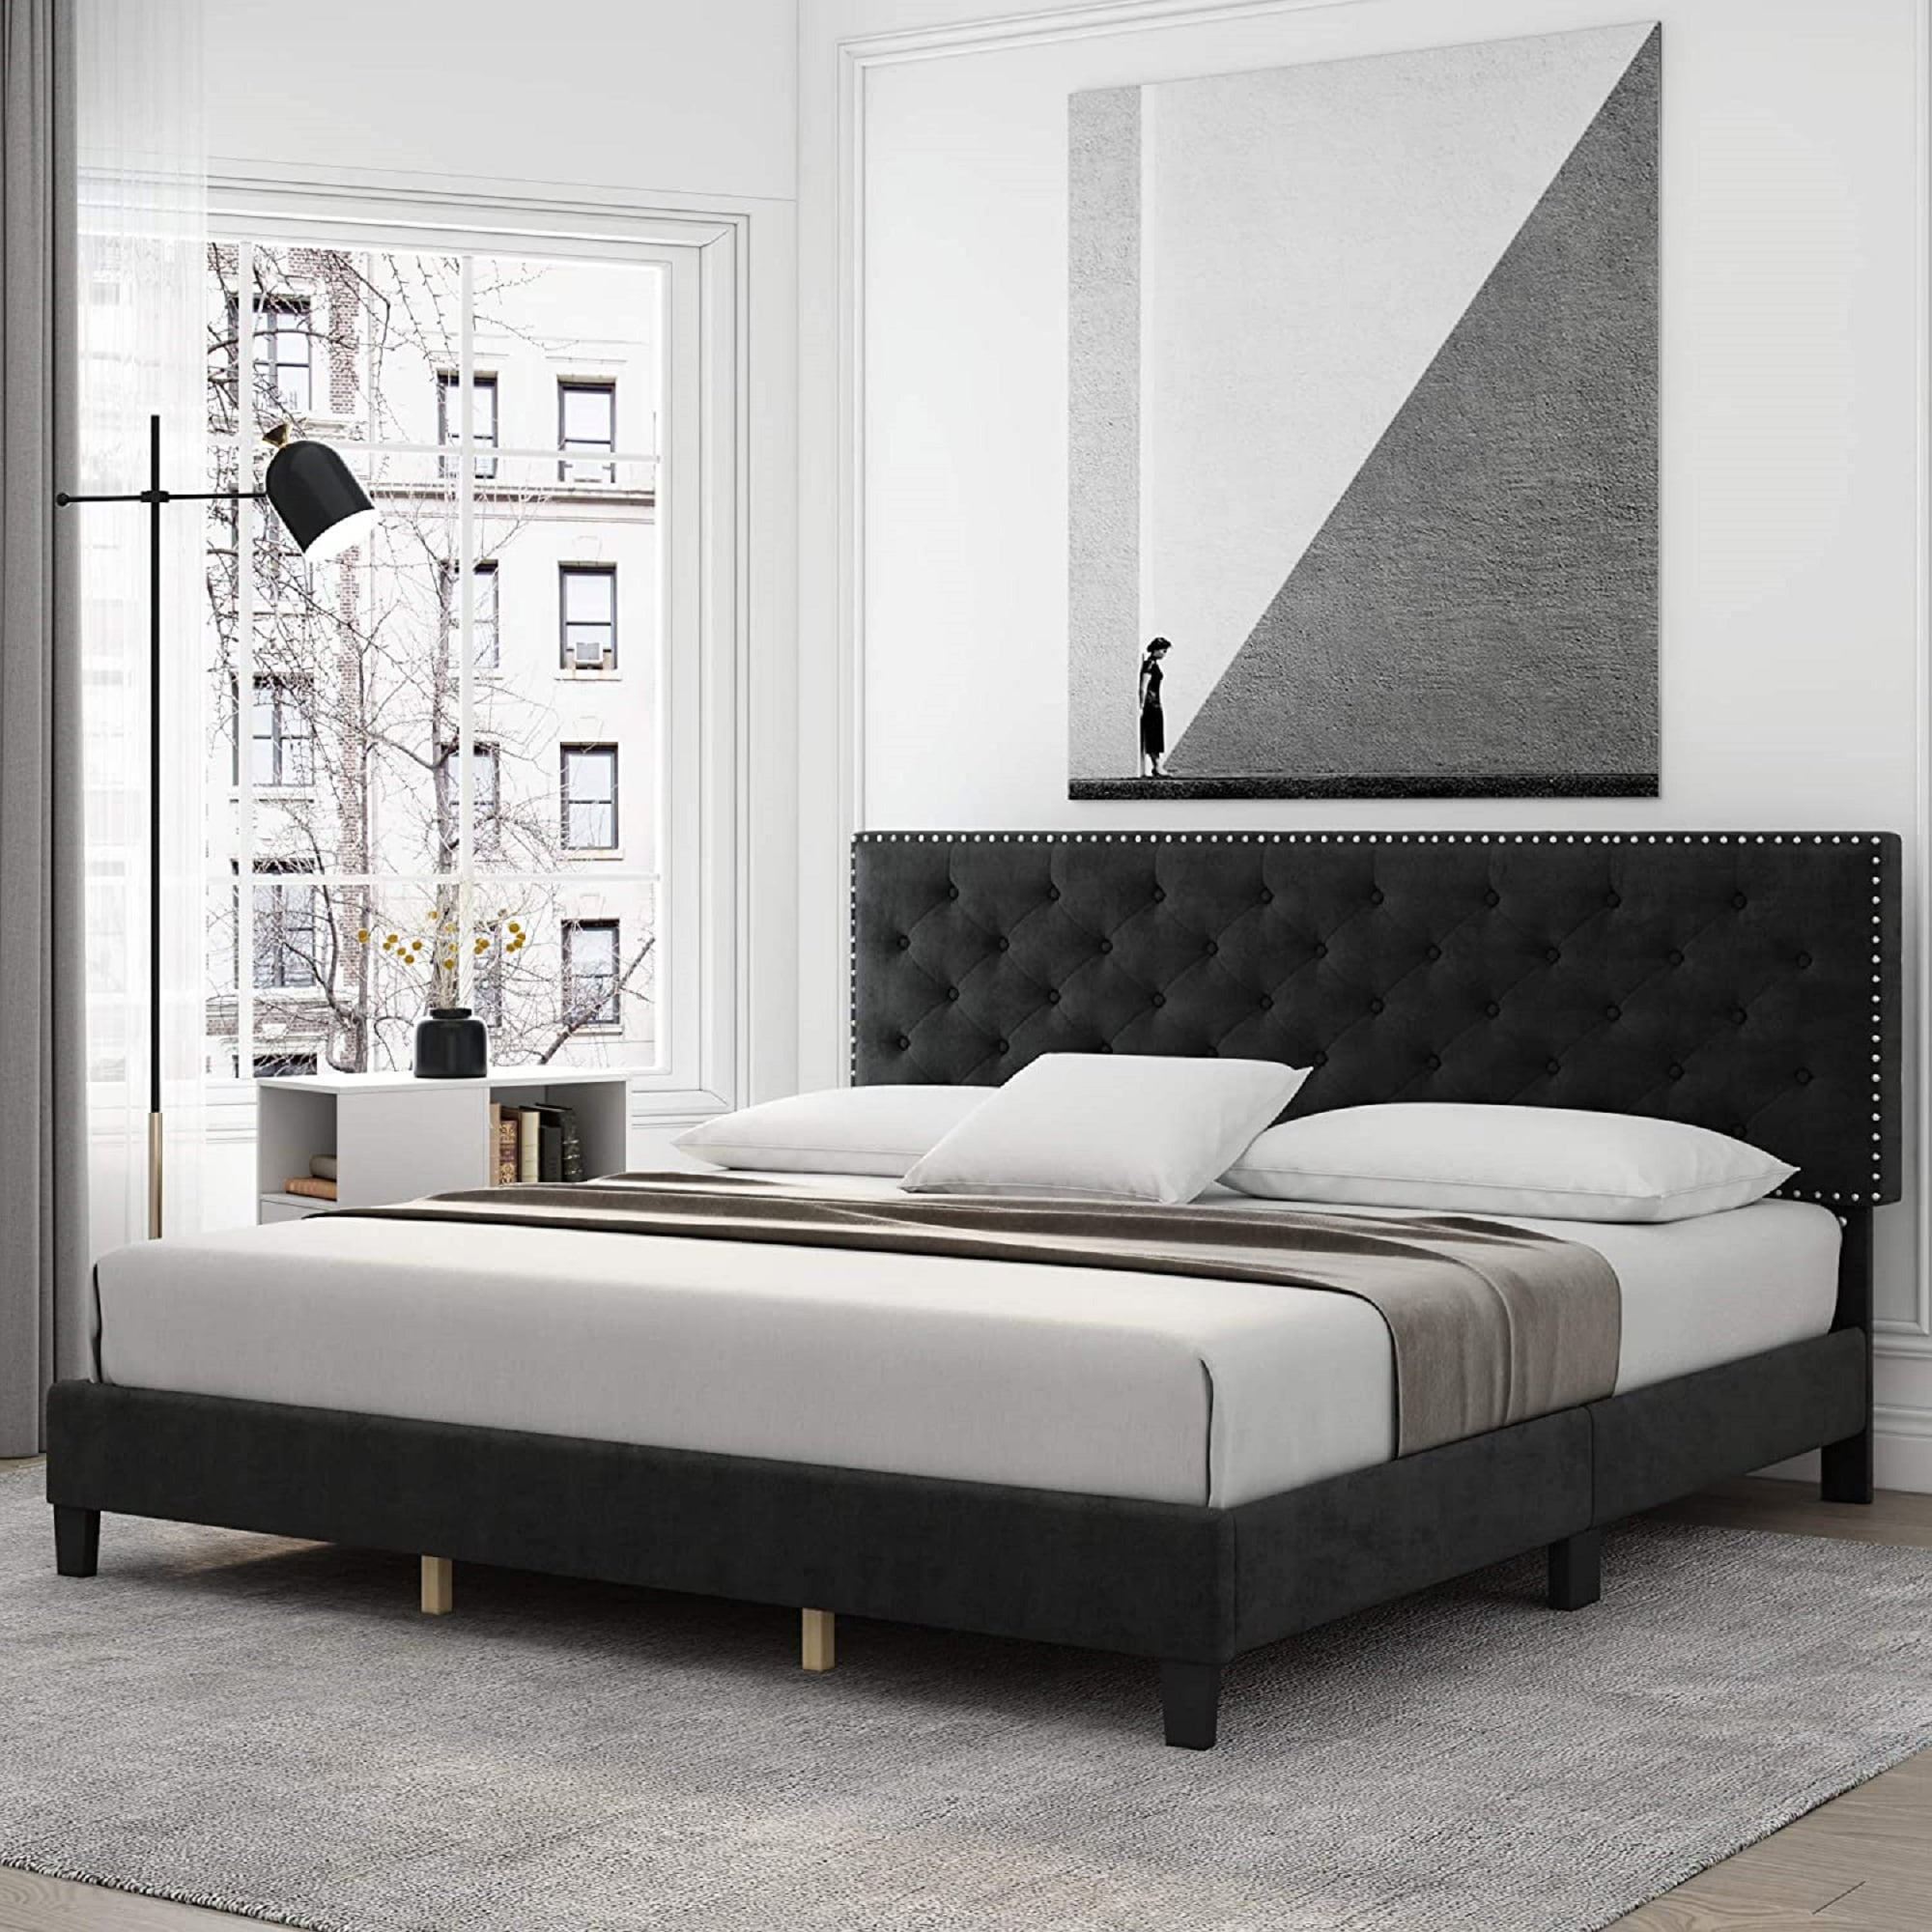 Buy Homfa King Size Bed with Headboard, Modern Upholstered Platform Bed